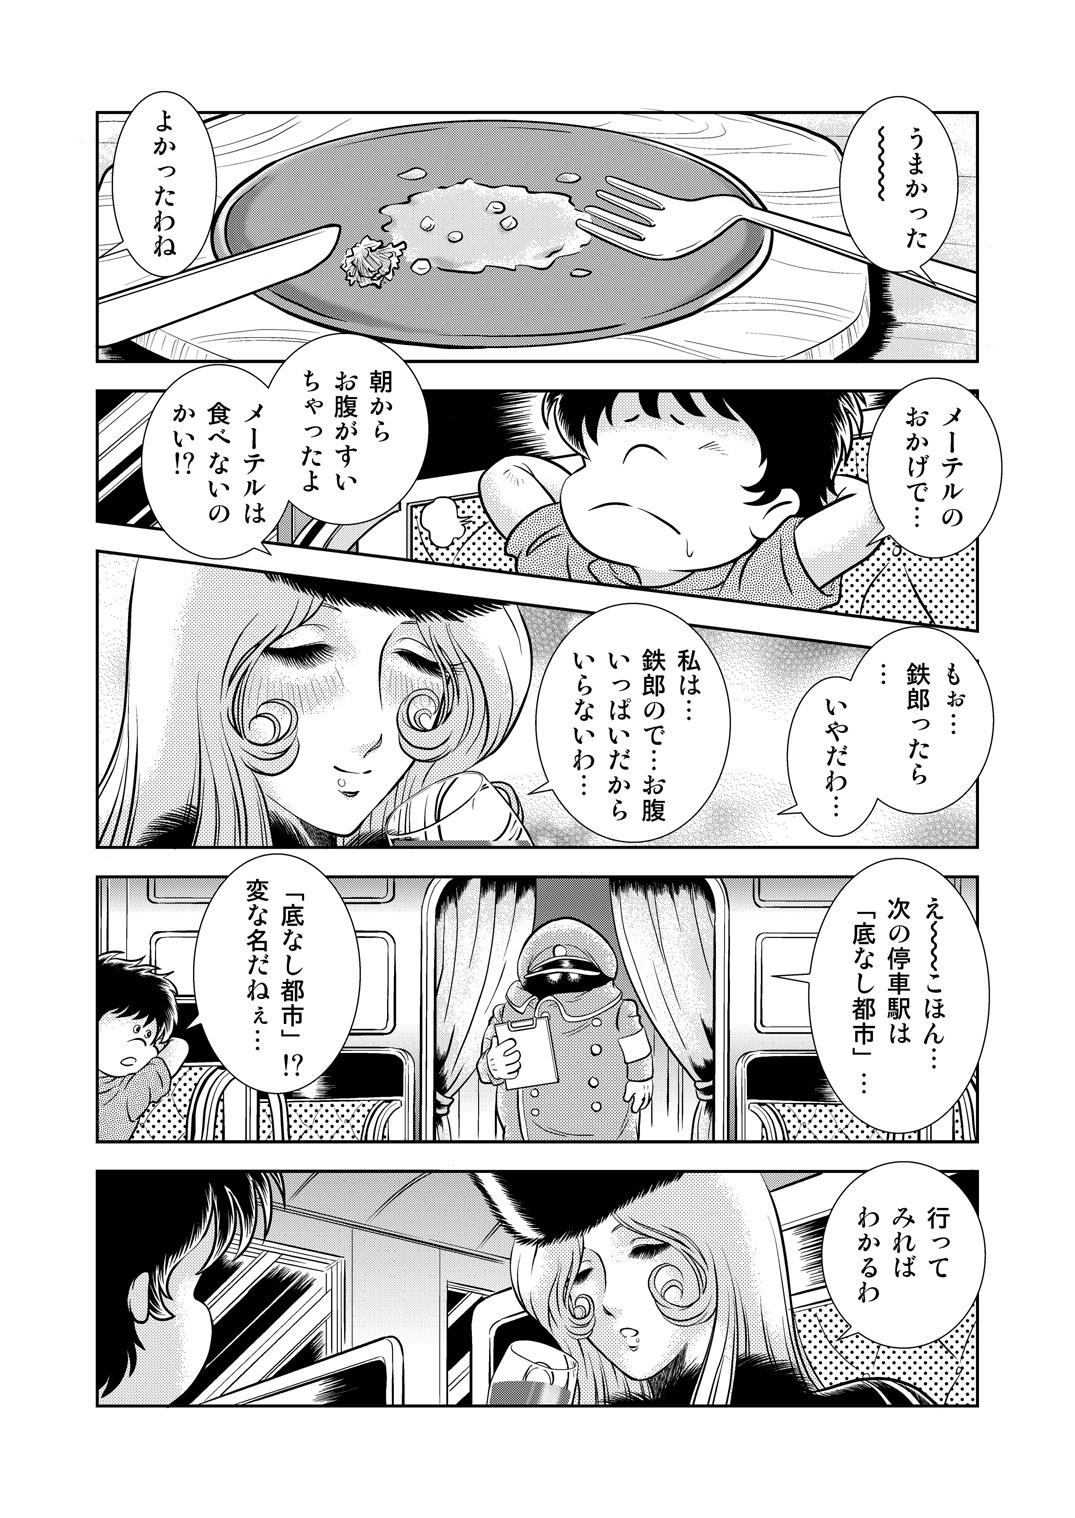 Domina Maetel Story 8 - Galaxy express 999 Ass Fucked - Page 10